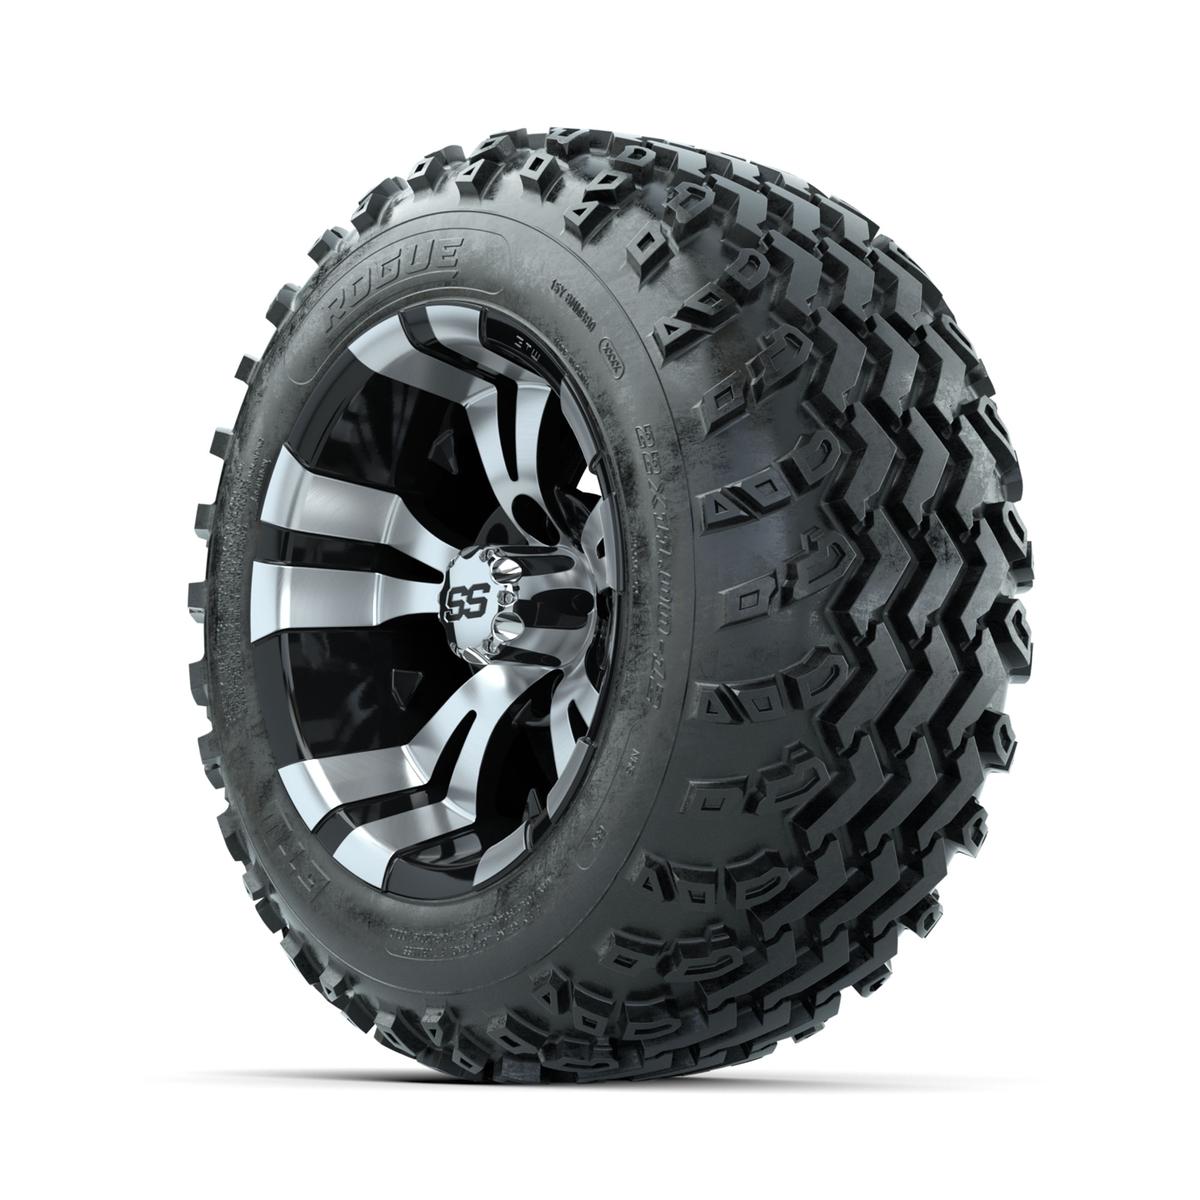 GTW Vampire Machined/Black 12 in Wheels with 22x11.00-12 Rogue All Terrain Tires – Full Set